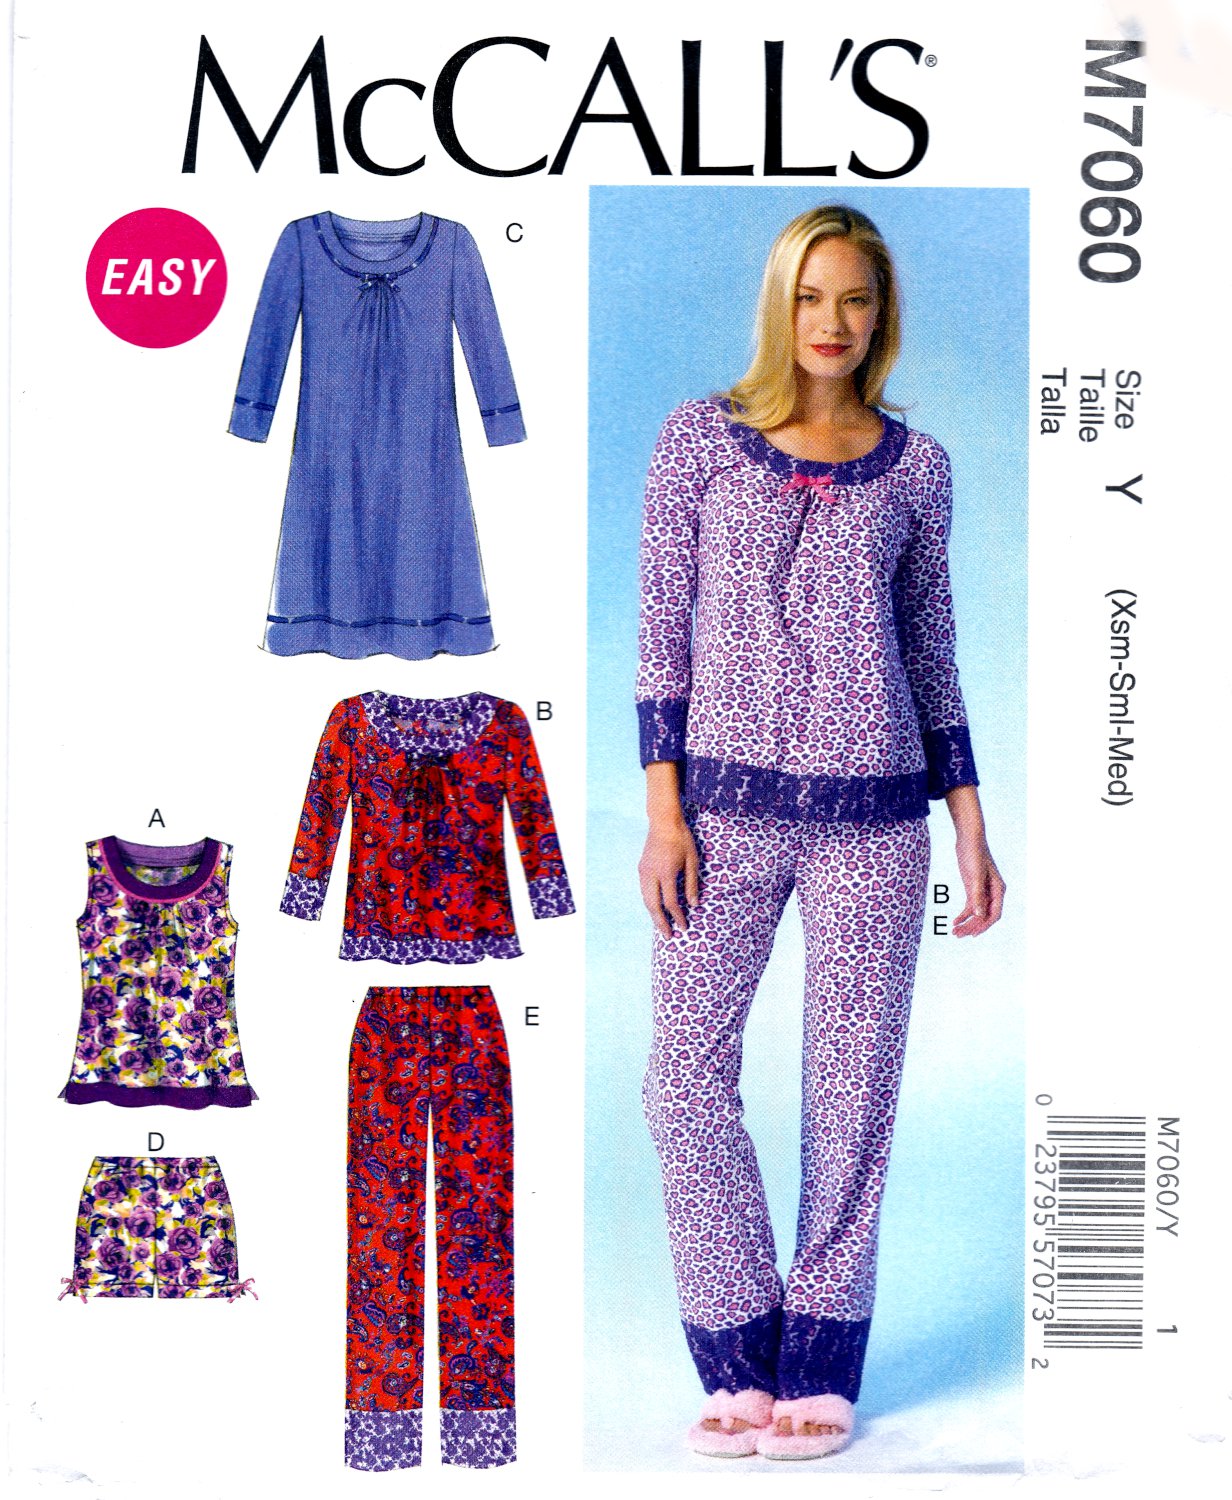 McCall's M7060 Misses Top Dress Shorts Pants Sewing Pattern Sizes Xsm-Sml-Med